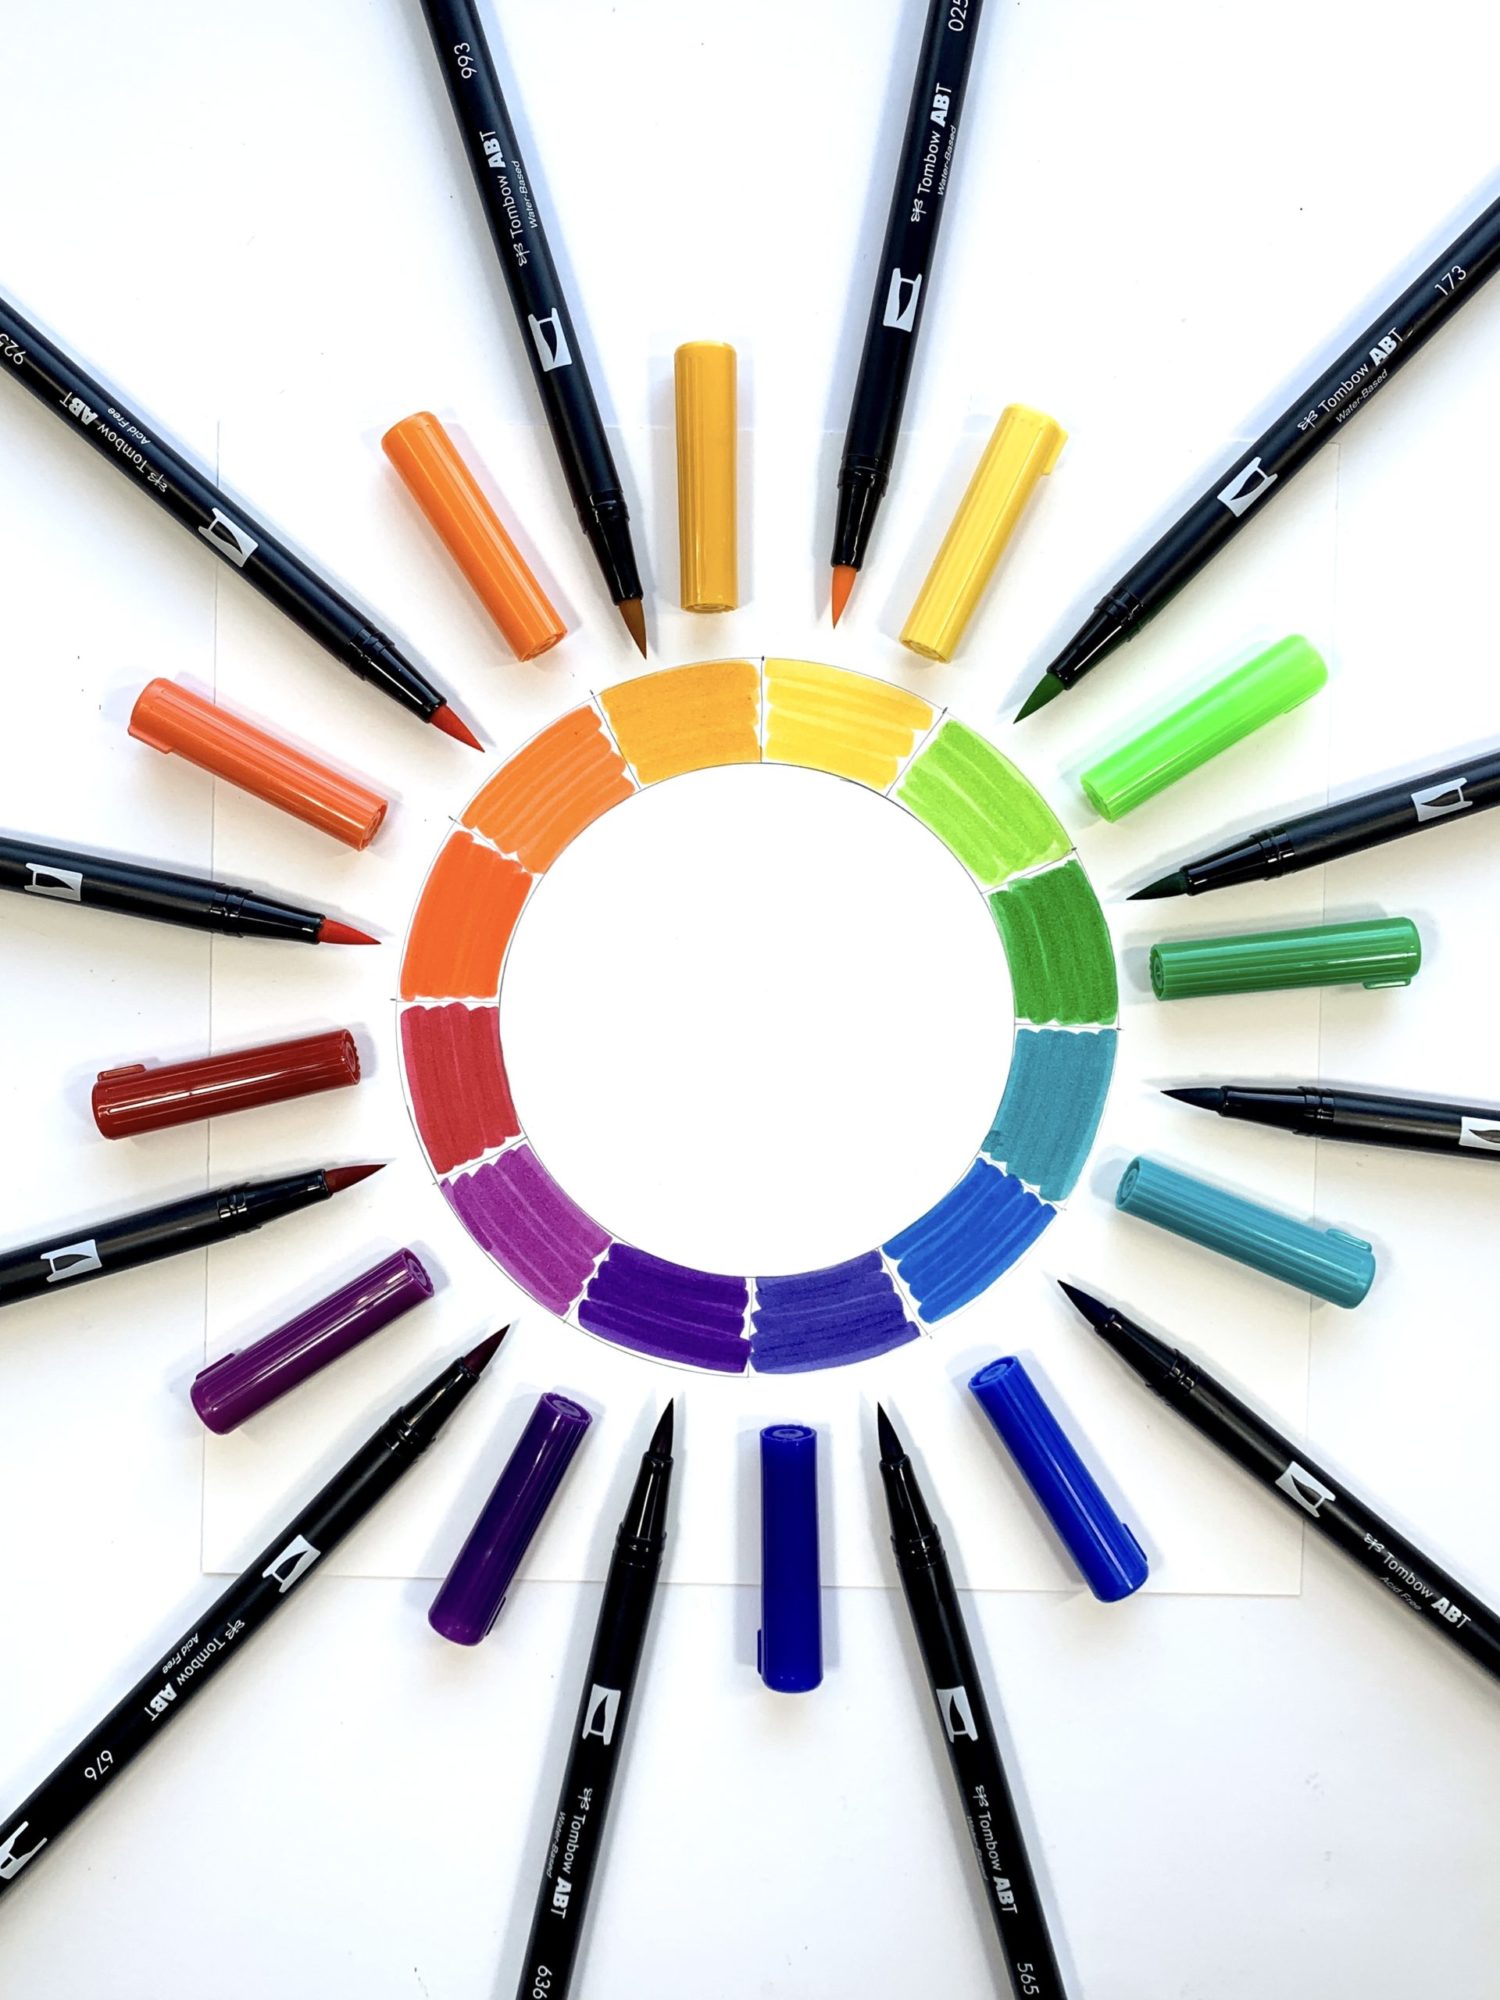 Pick the perfect @tombowusa Dual Brush Pen set for this season. Color guide by Ali LePere. #dualbrushpens #bestmarkers #colorpalette